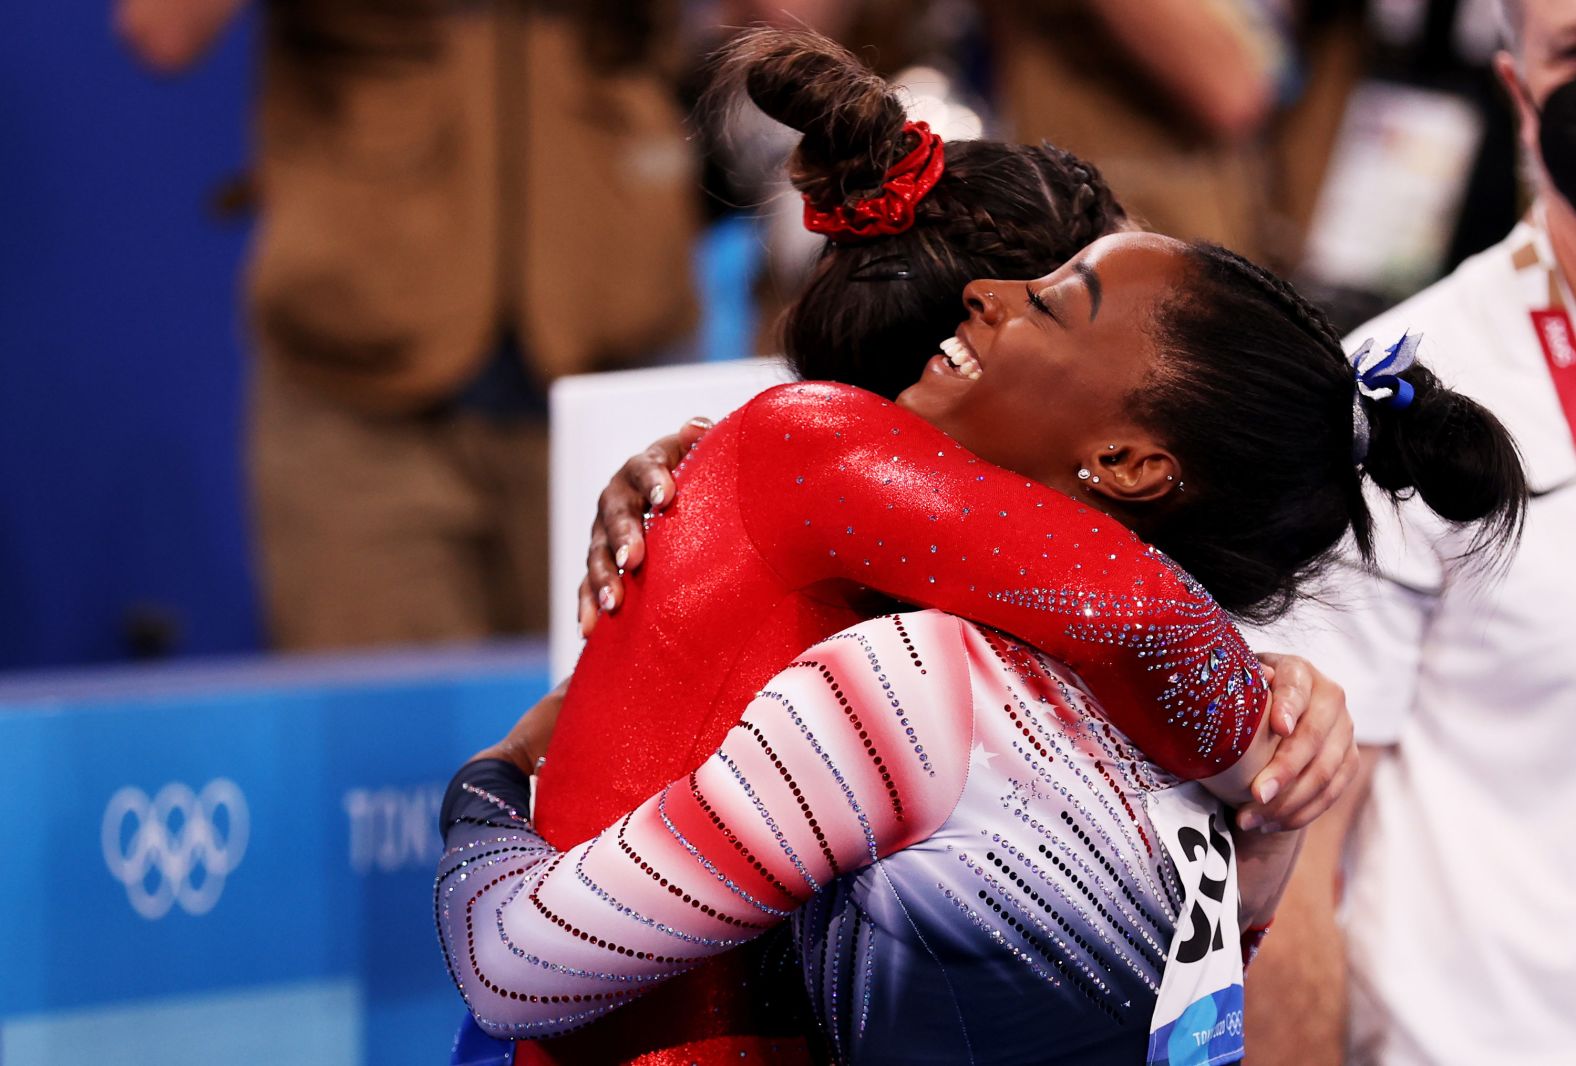 Biles is hugged by teammate Suni Lee, who was also competing in the event. Lee <a href="index.php?page=&url=http%3A%2F%2Fwww.cnn.com%2F2021%2F07%2F29%2Fsport%2Fgallery%2Fsuni-lee-gymnastics-gold-olympics%2Findex.html" target="_blank">won the individual all-around</a> last week.